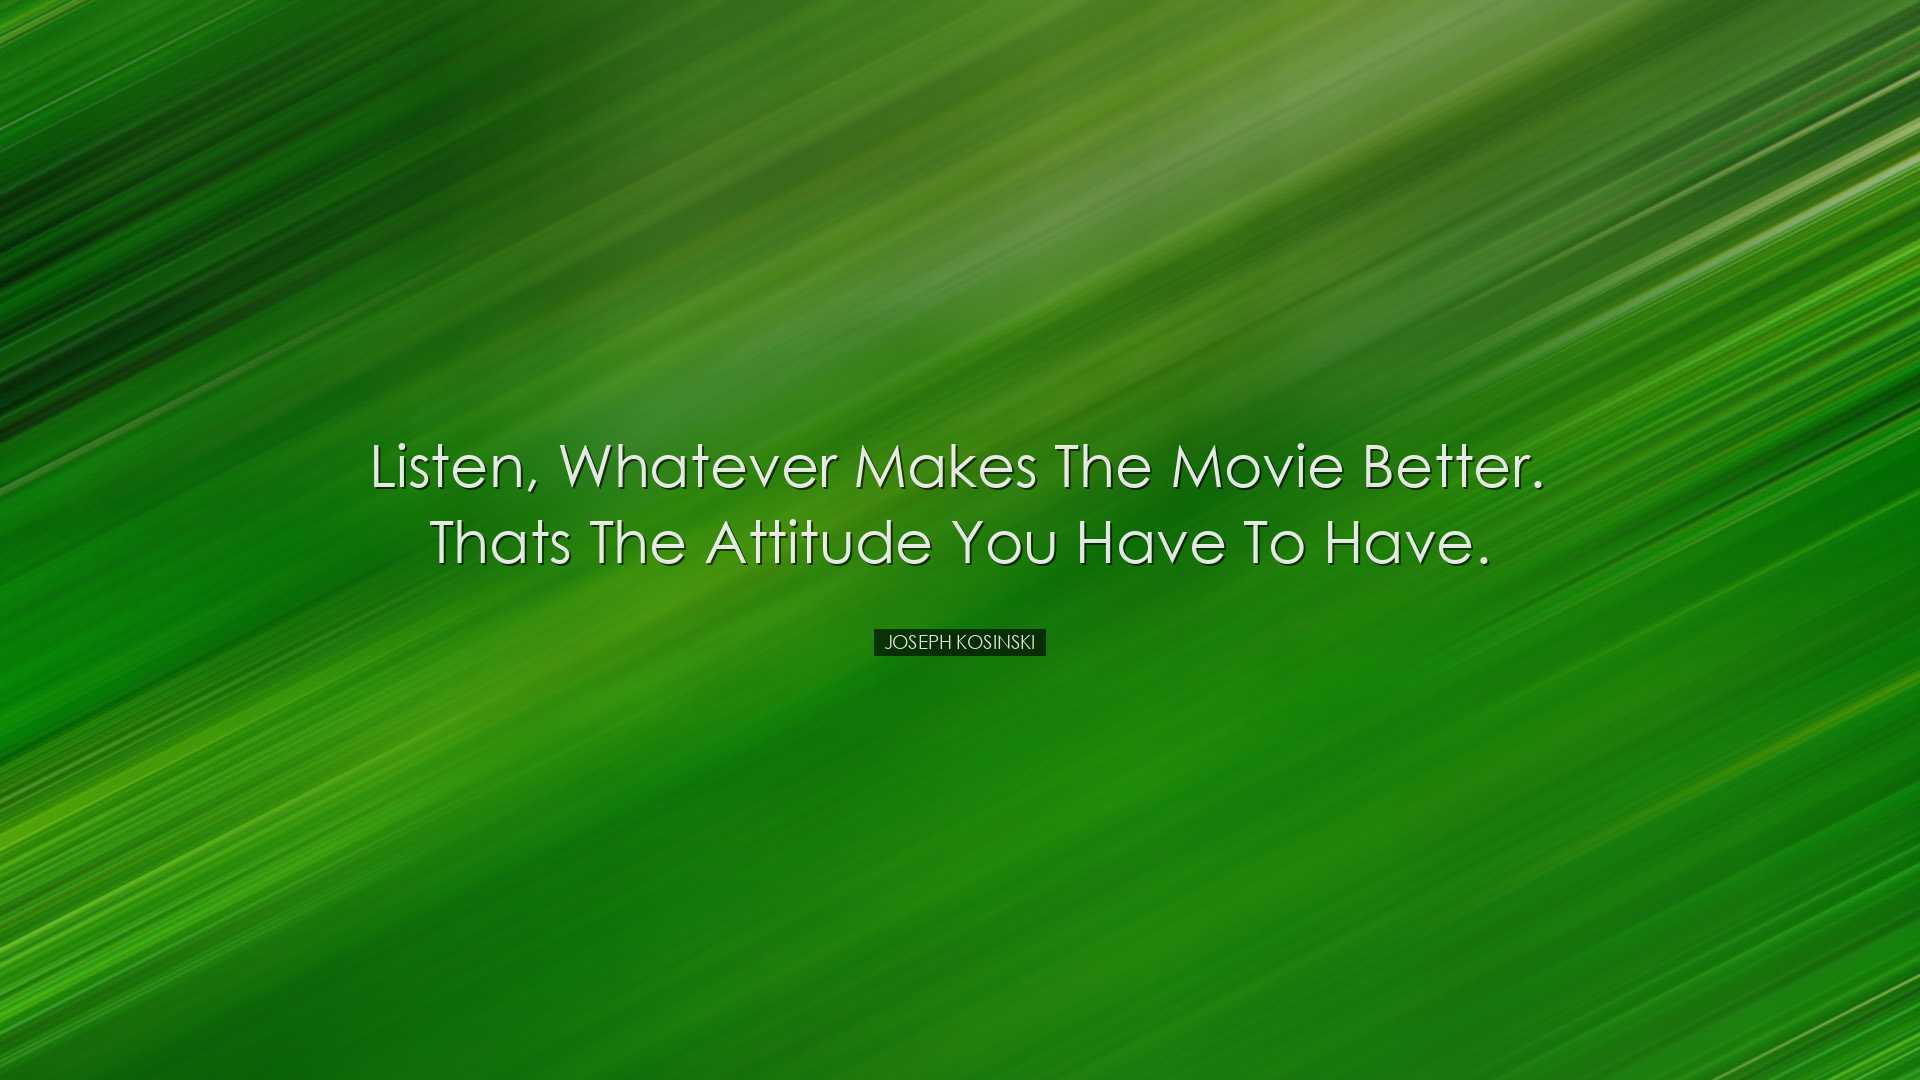 Listen, whatever makes the movie better. Thats the attitude you ha